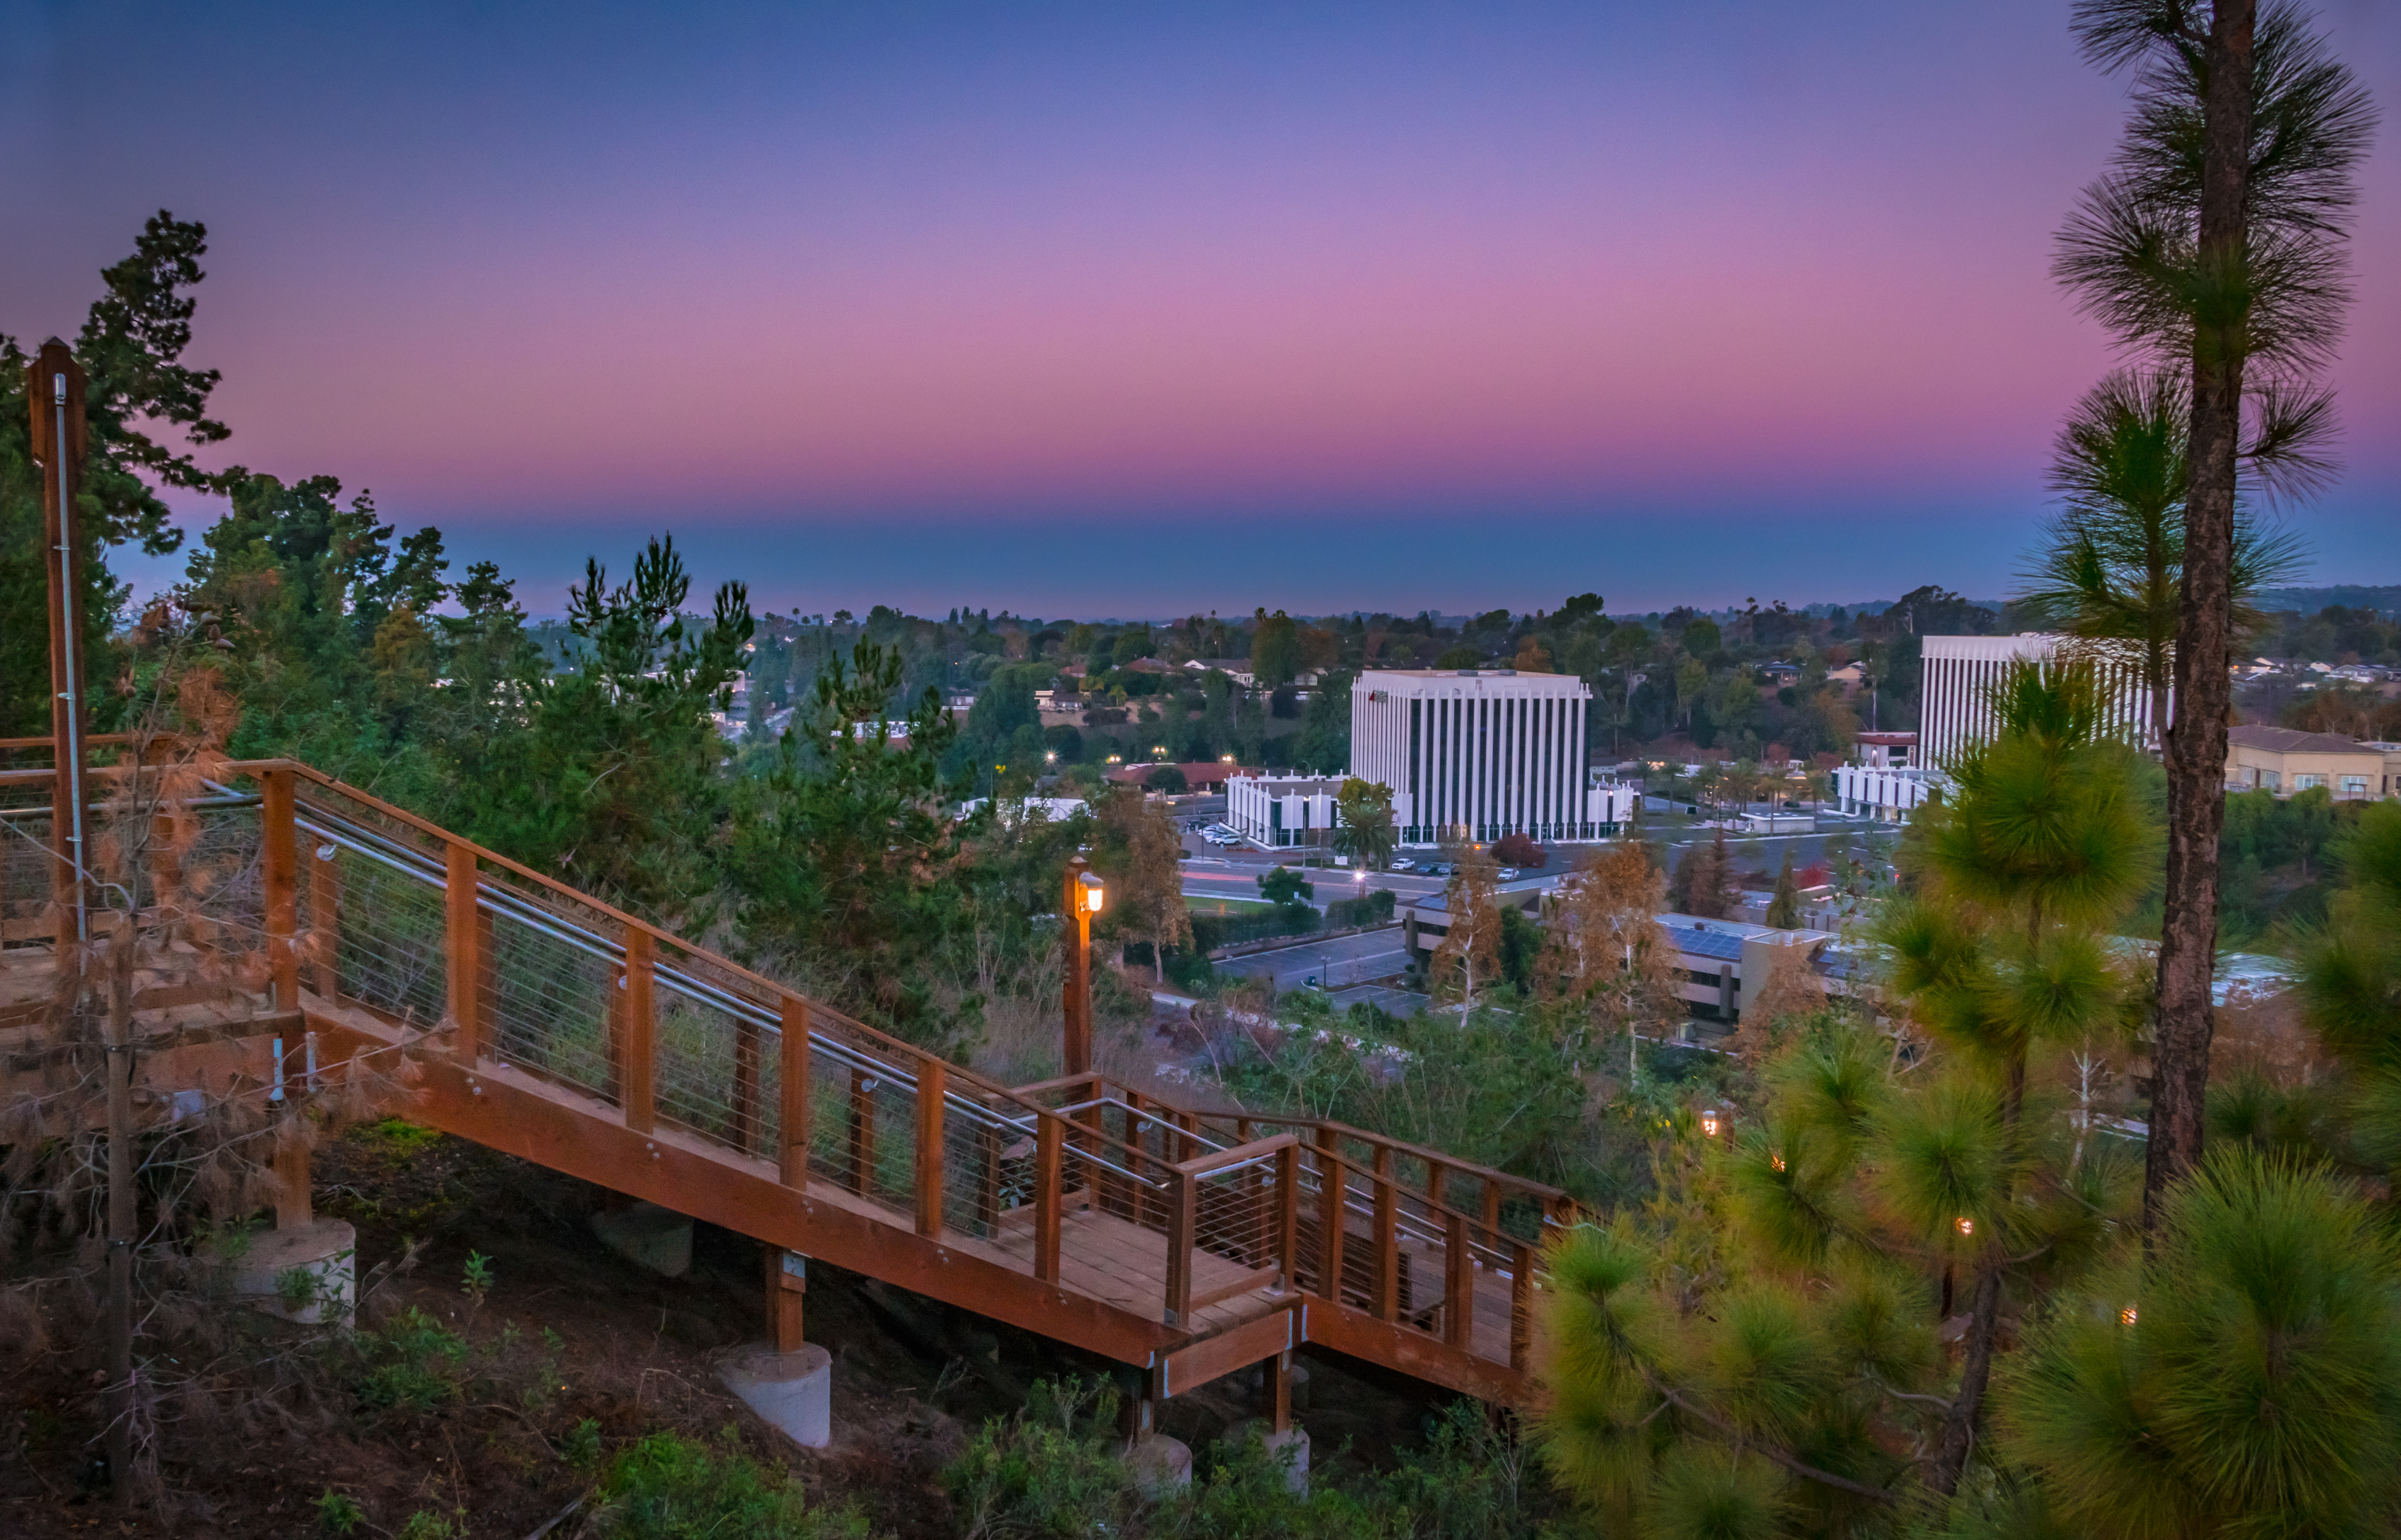 Wooden walkway with handrails leading through a scenic area overlooking a town at twilight